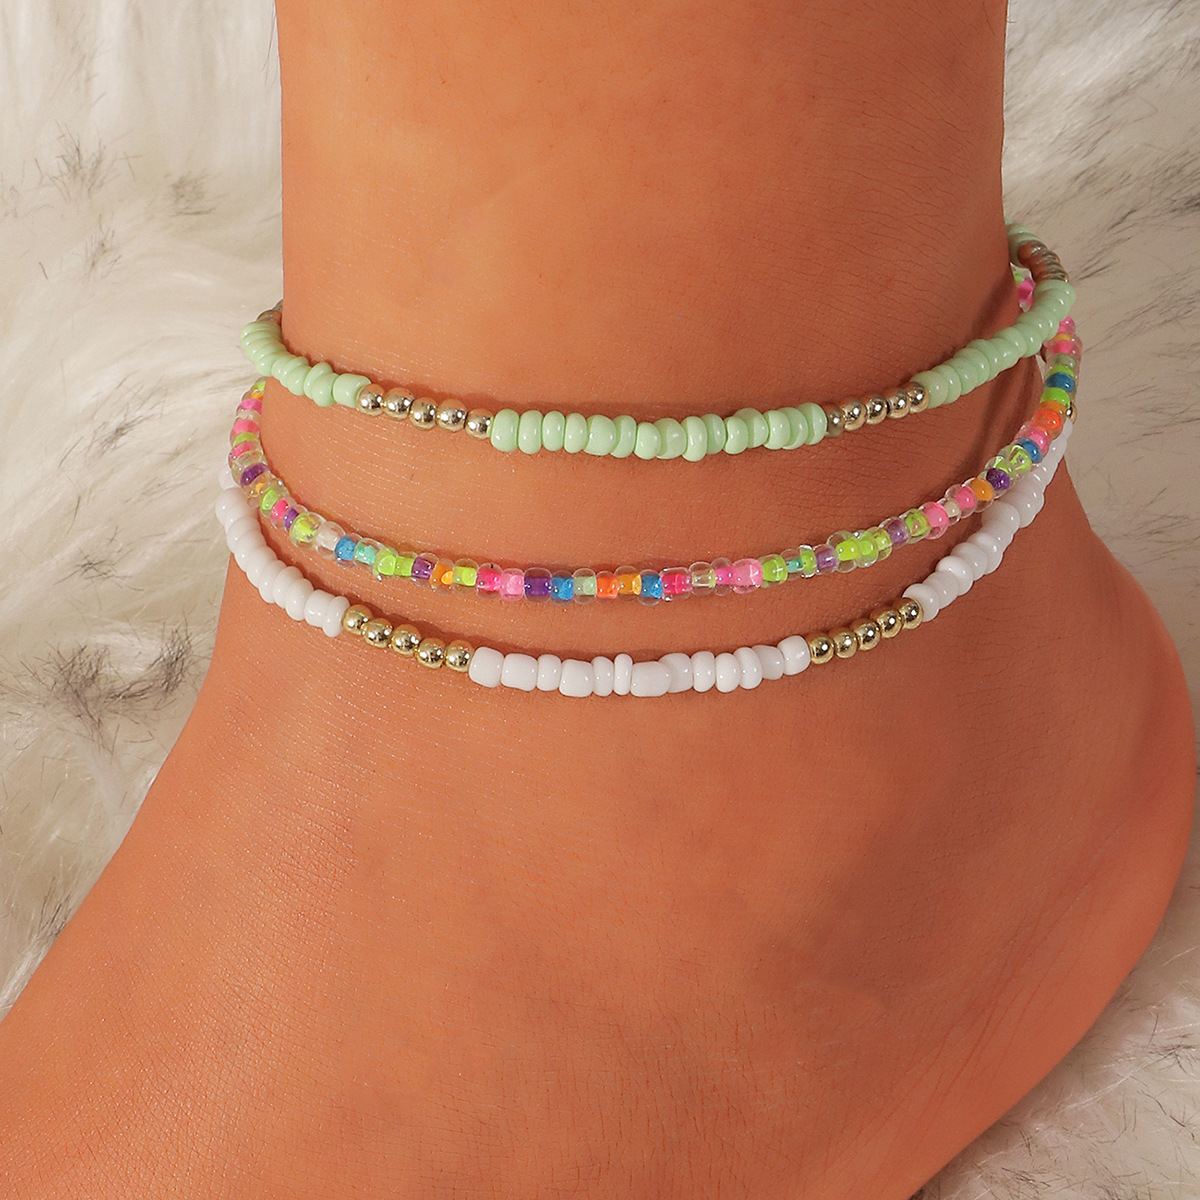 DF000 Women Boho Beads Anklets Colorful Stretch Rainbow Ankle Bracelets Beaded Bracelet Elastic Foot and Hand Chain Jewelry